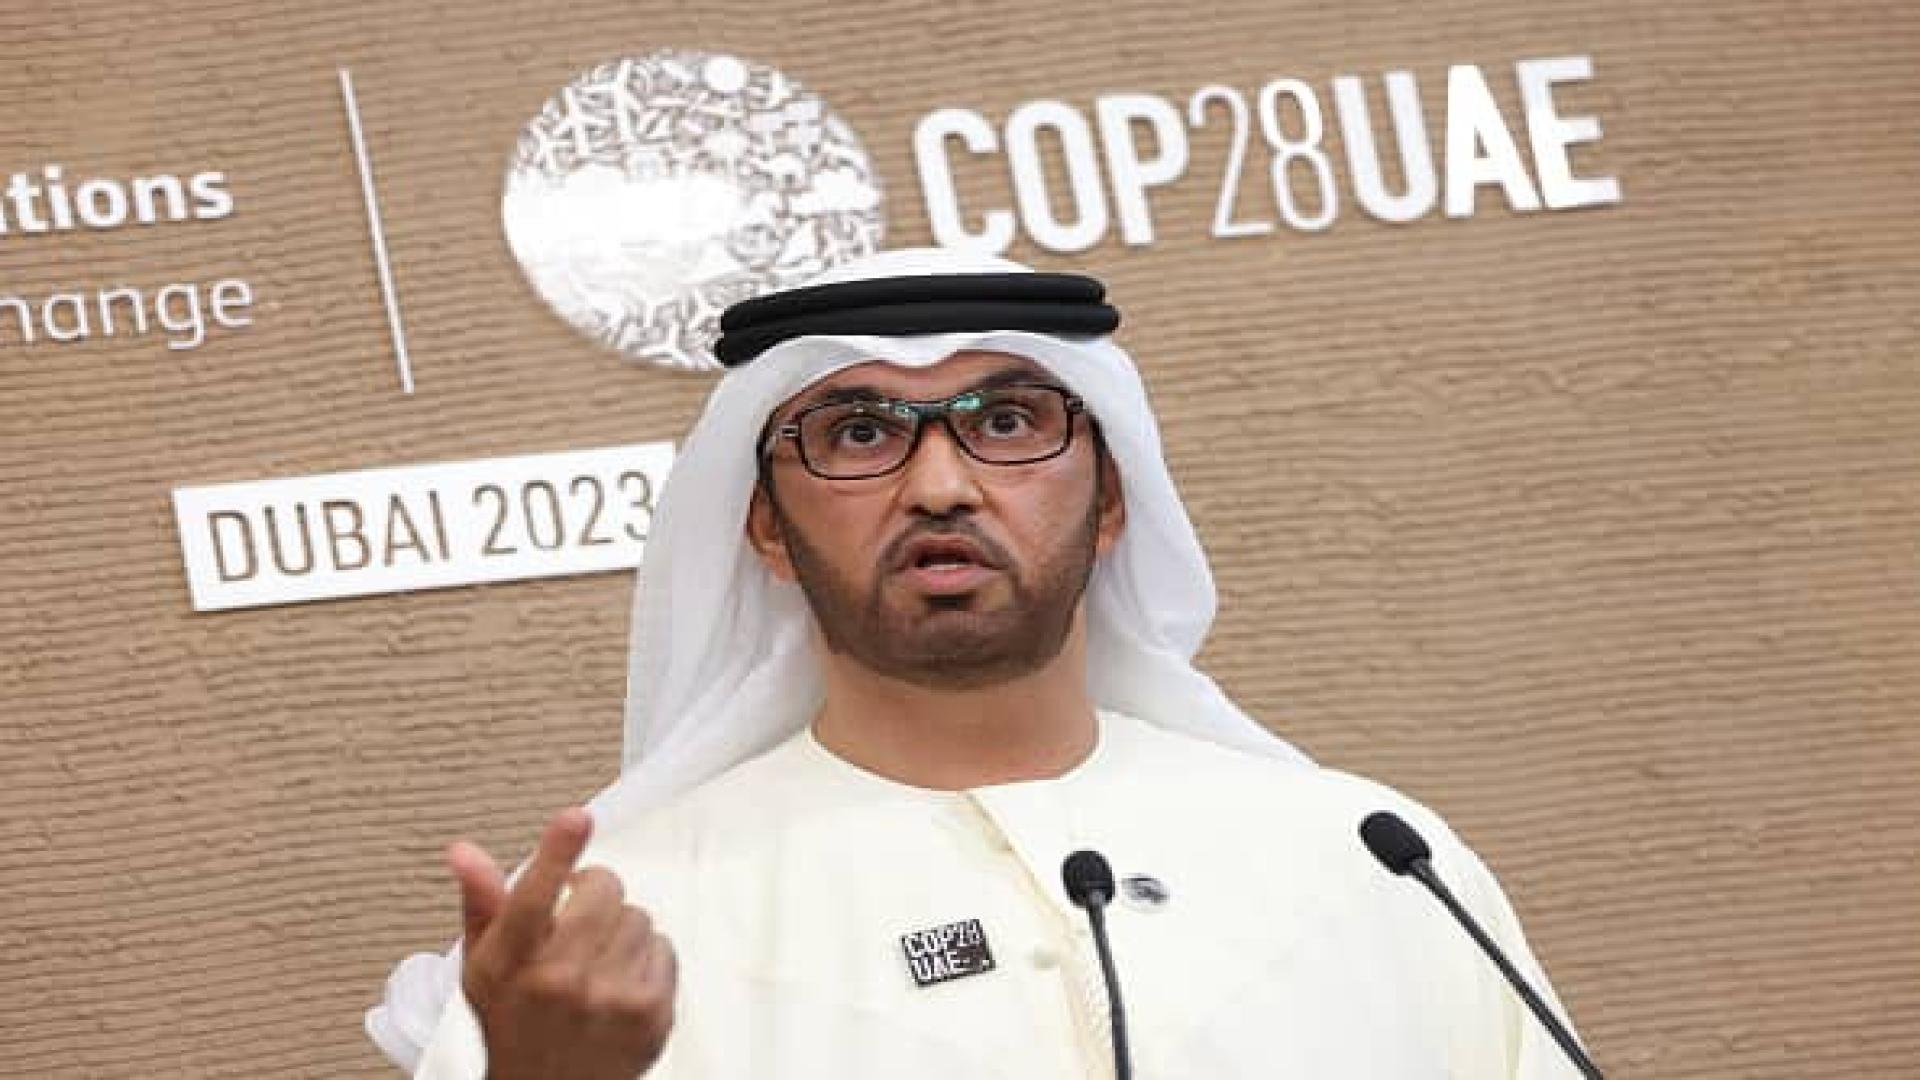 Anger and frustration as COP28 draft text omits fossil fuel phaseout